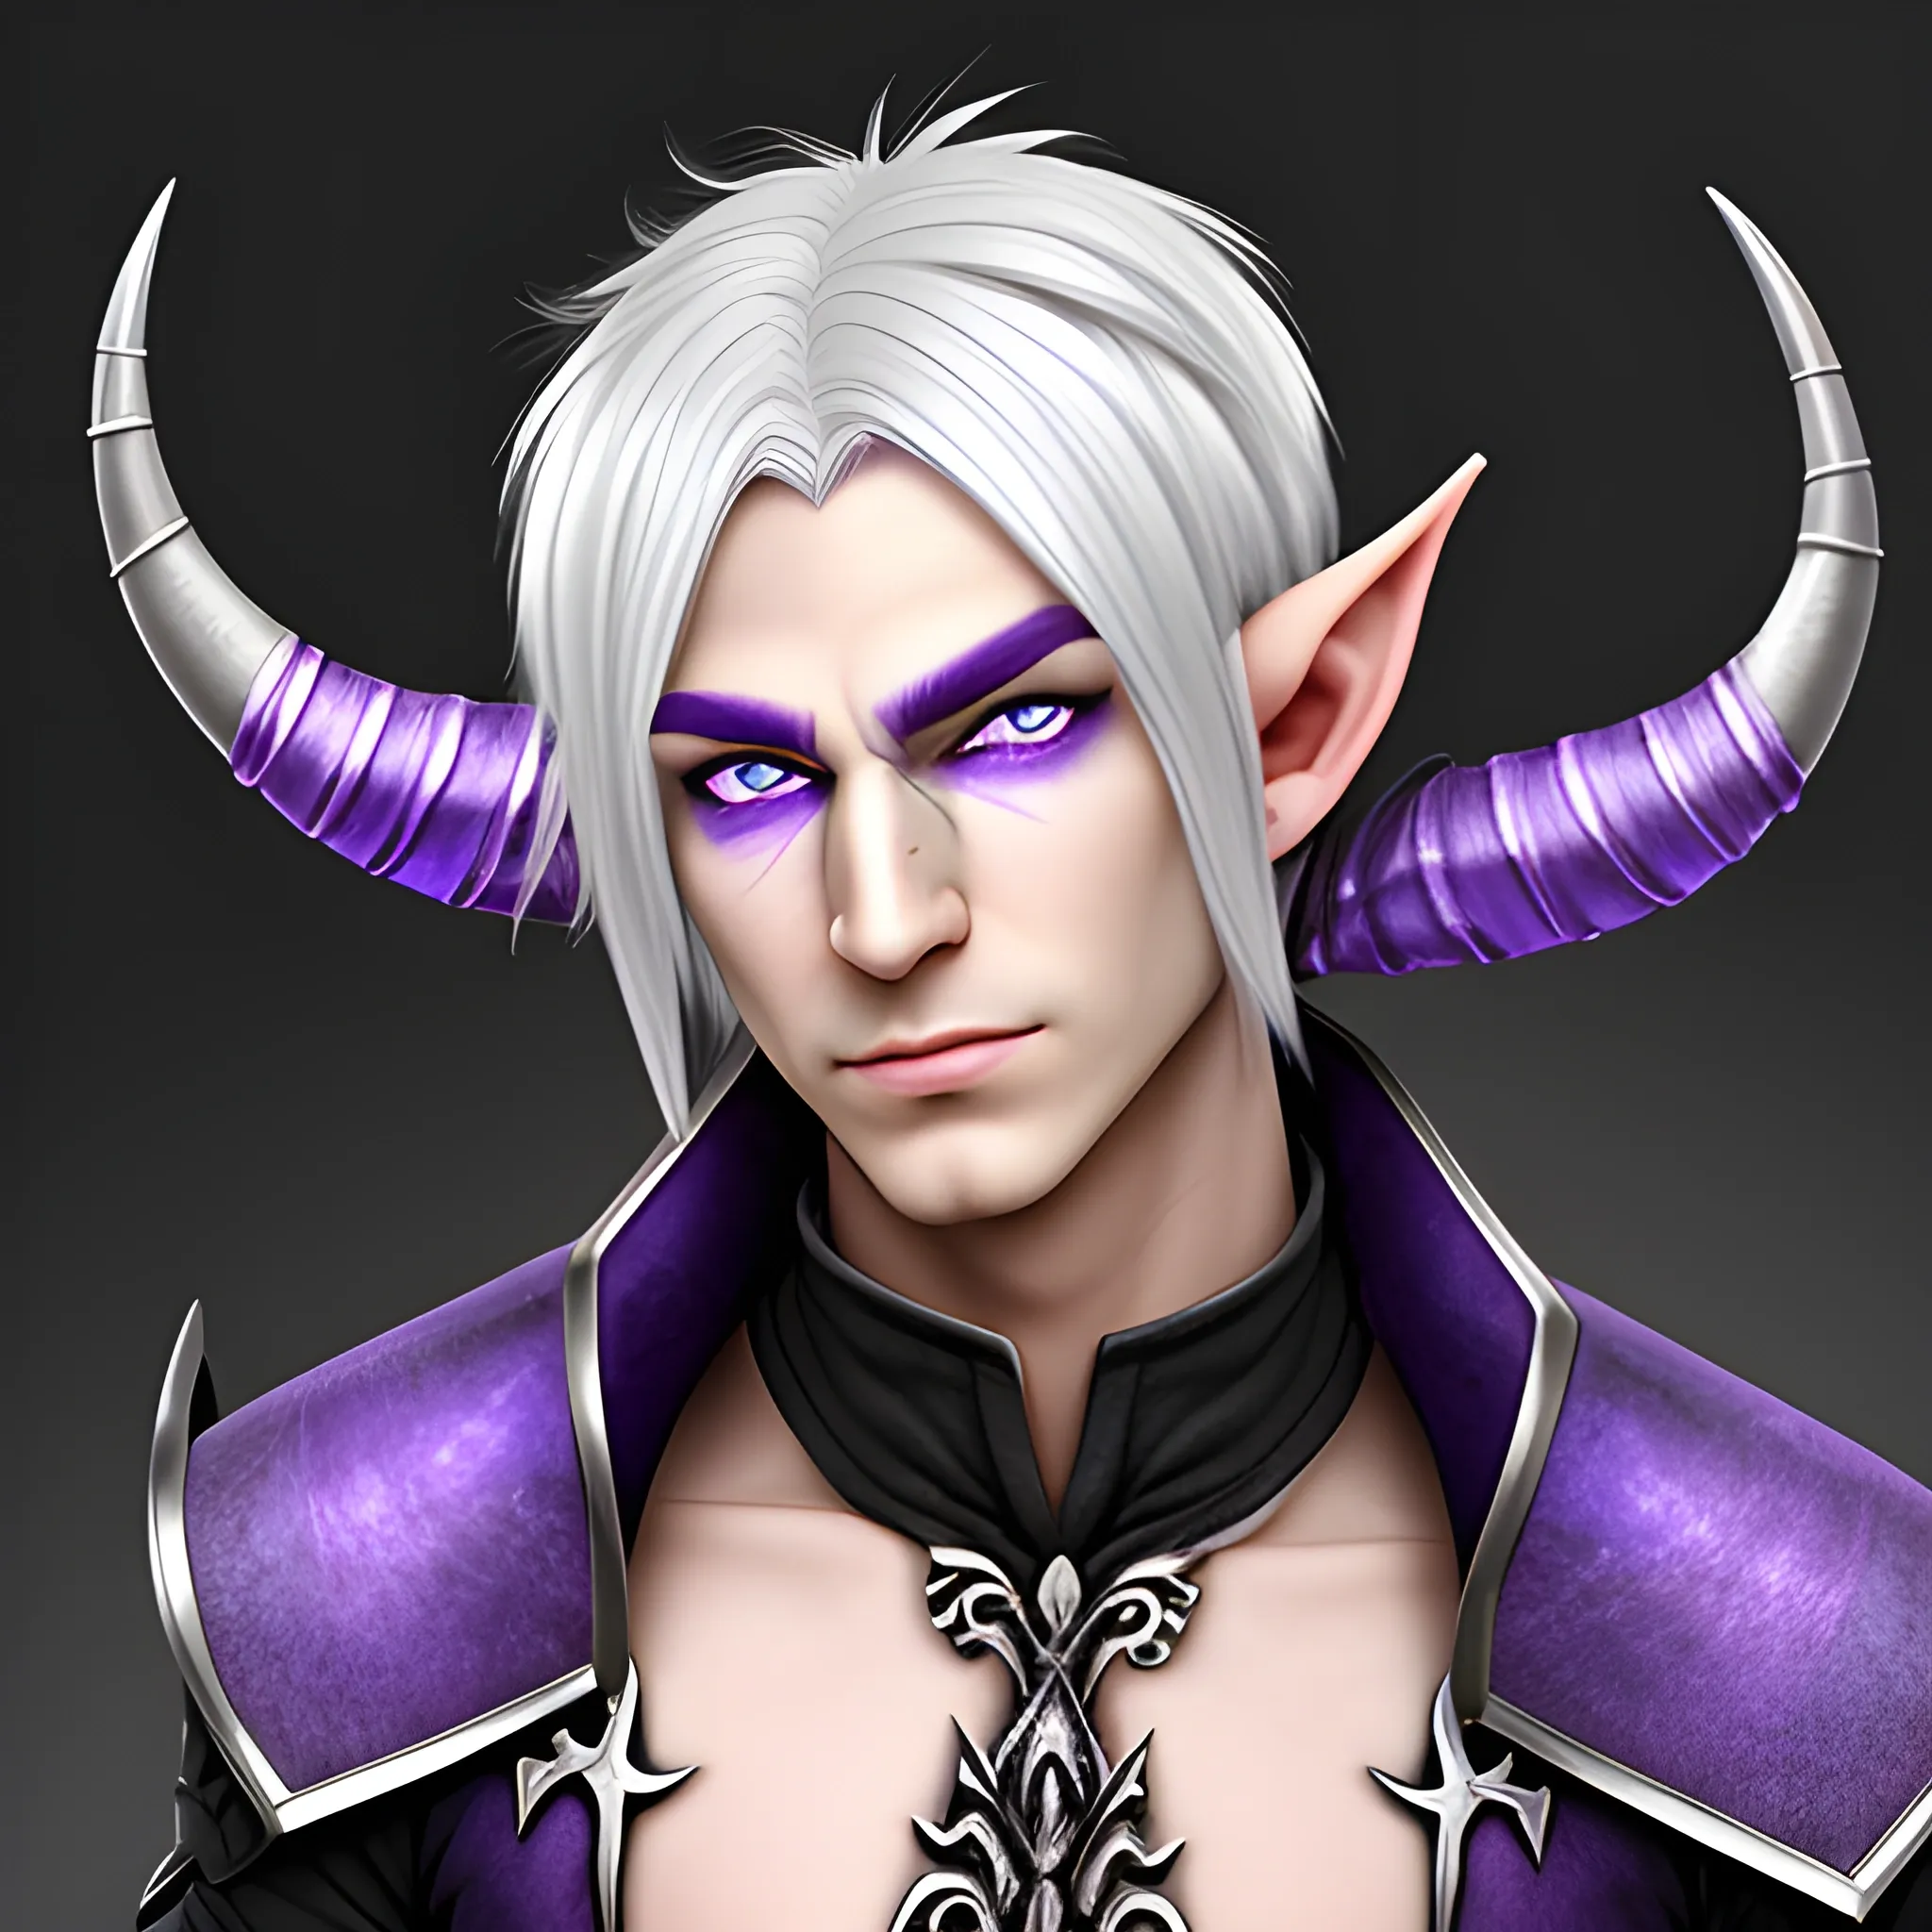 Male elf with sliver hair and purple eyes and horns